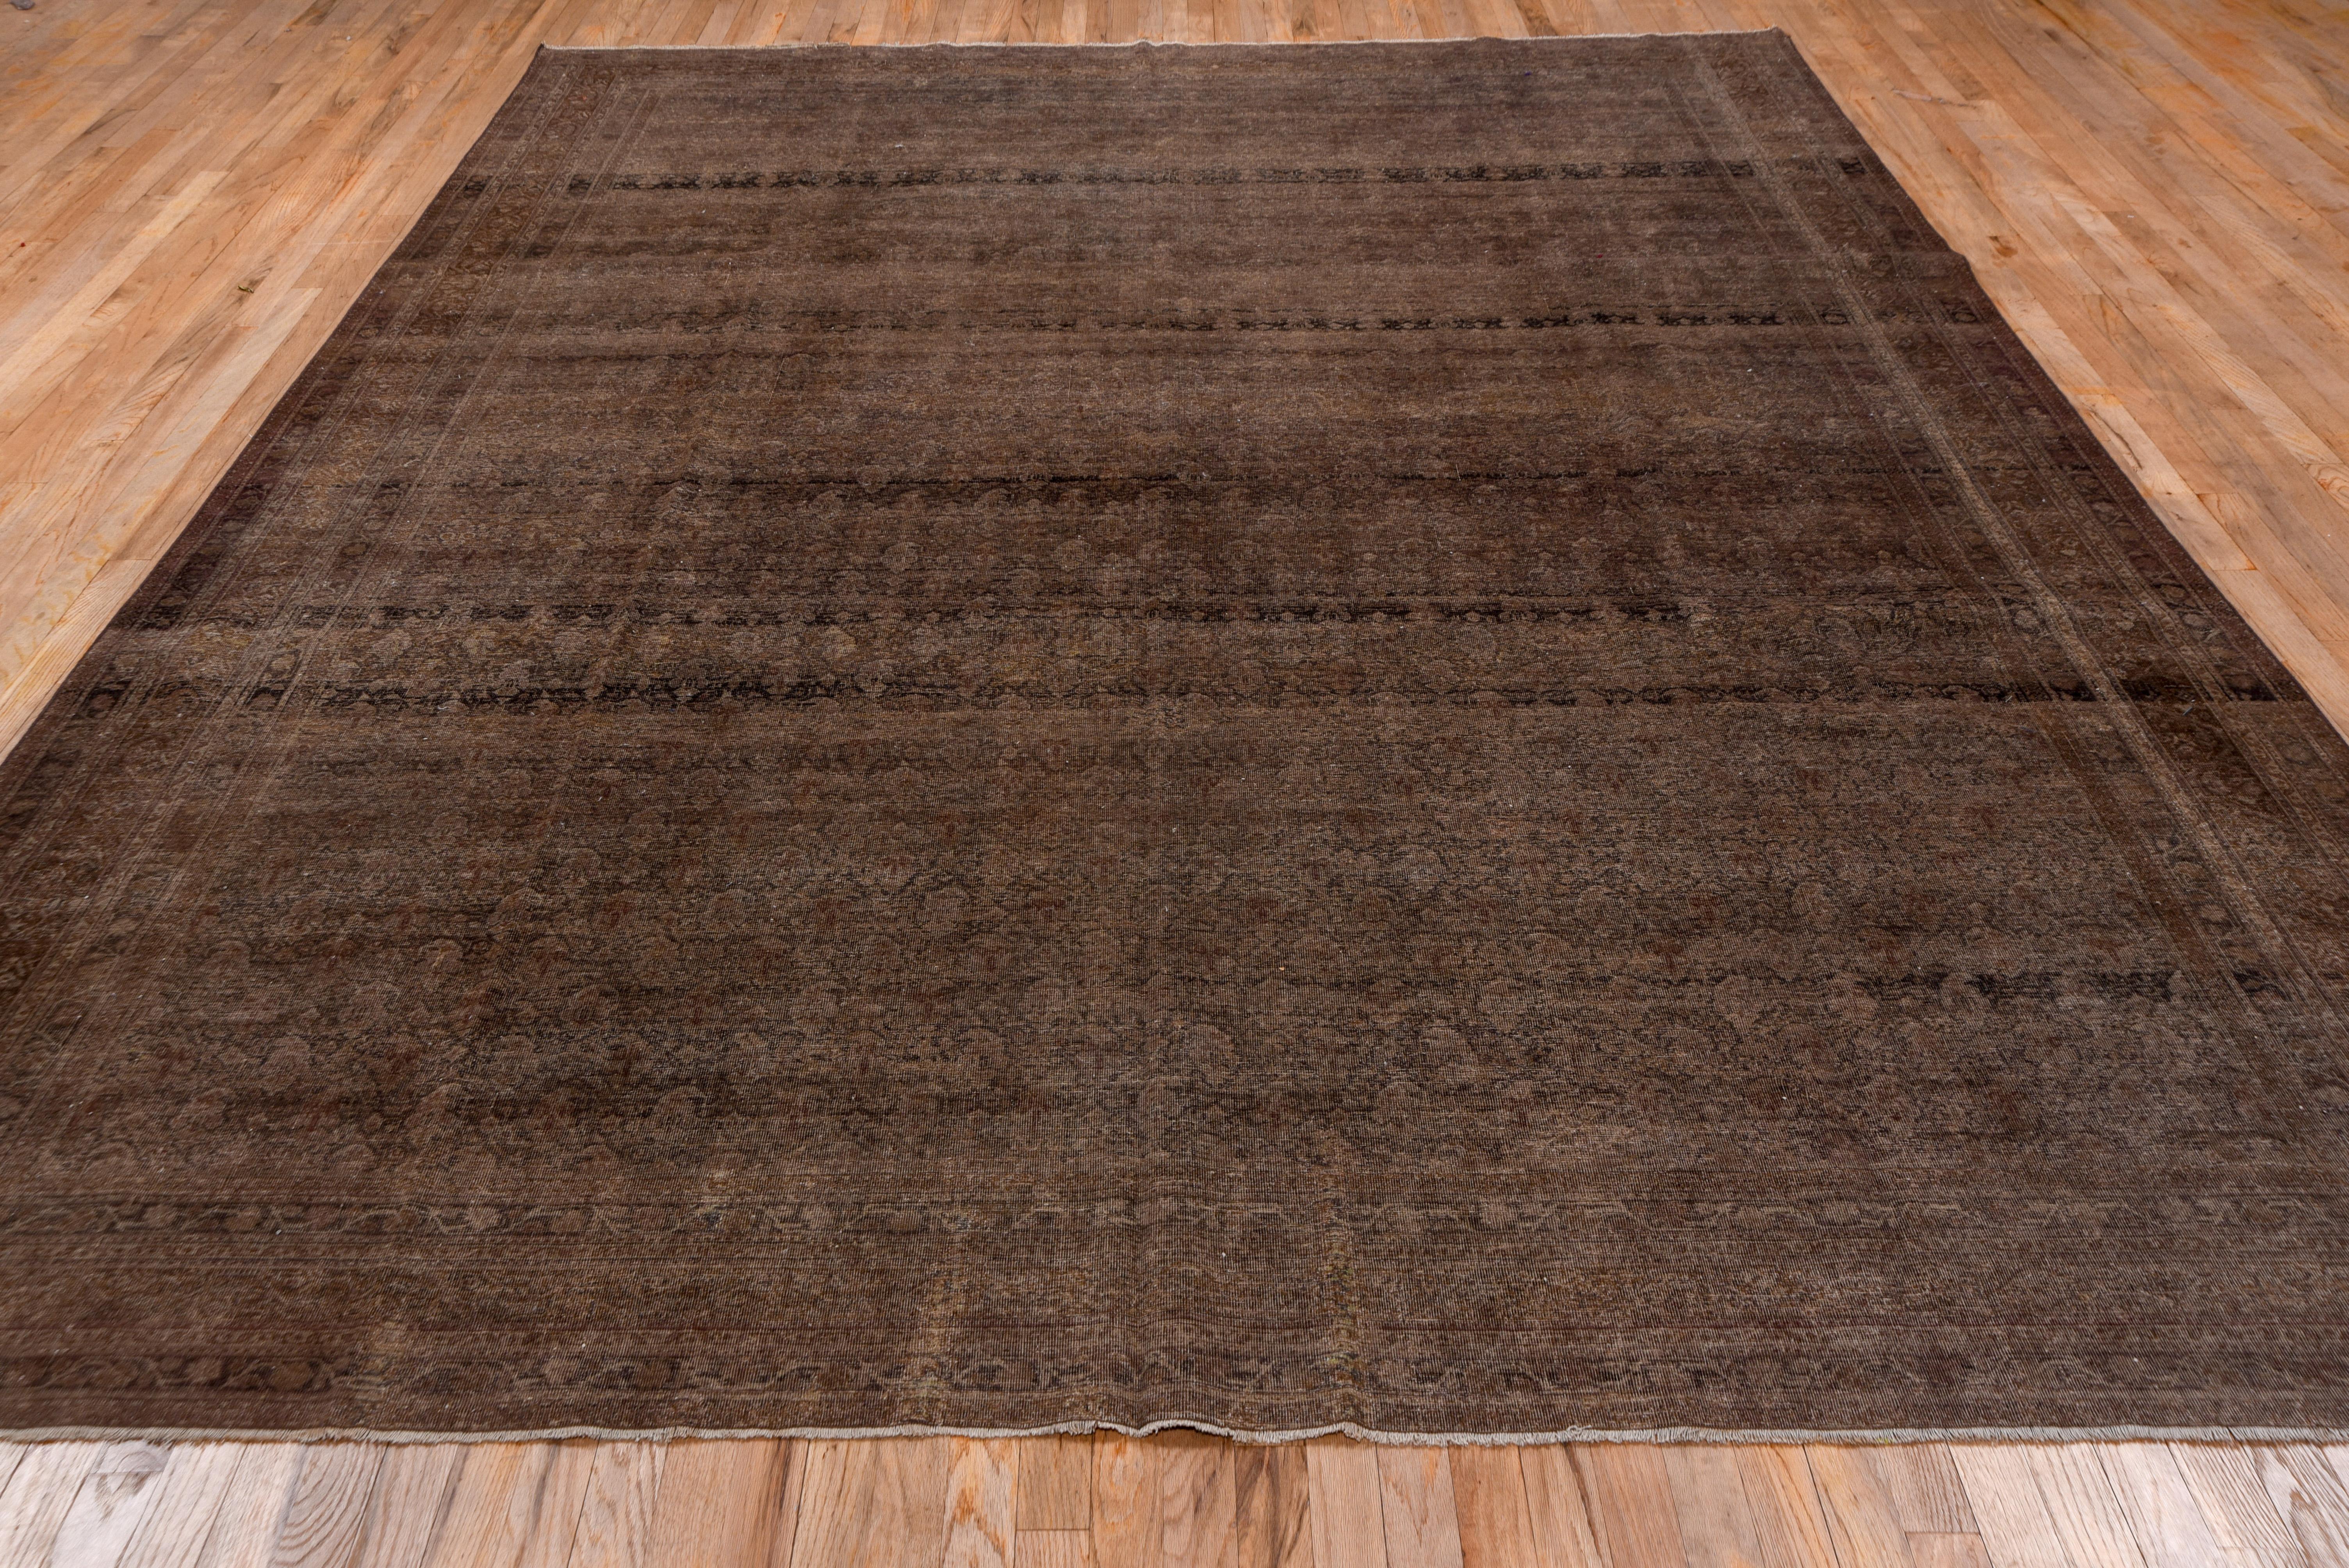 Shabby Chic Antique Indian Amritsar Rug, Brown Palette, circa 1920s In Good Condition For Sale In New York, NY